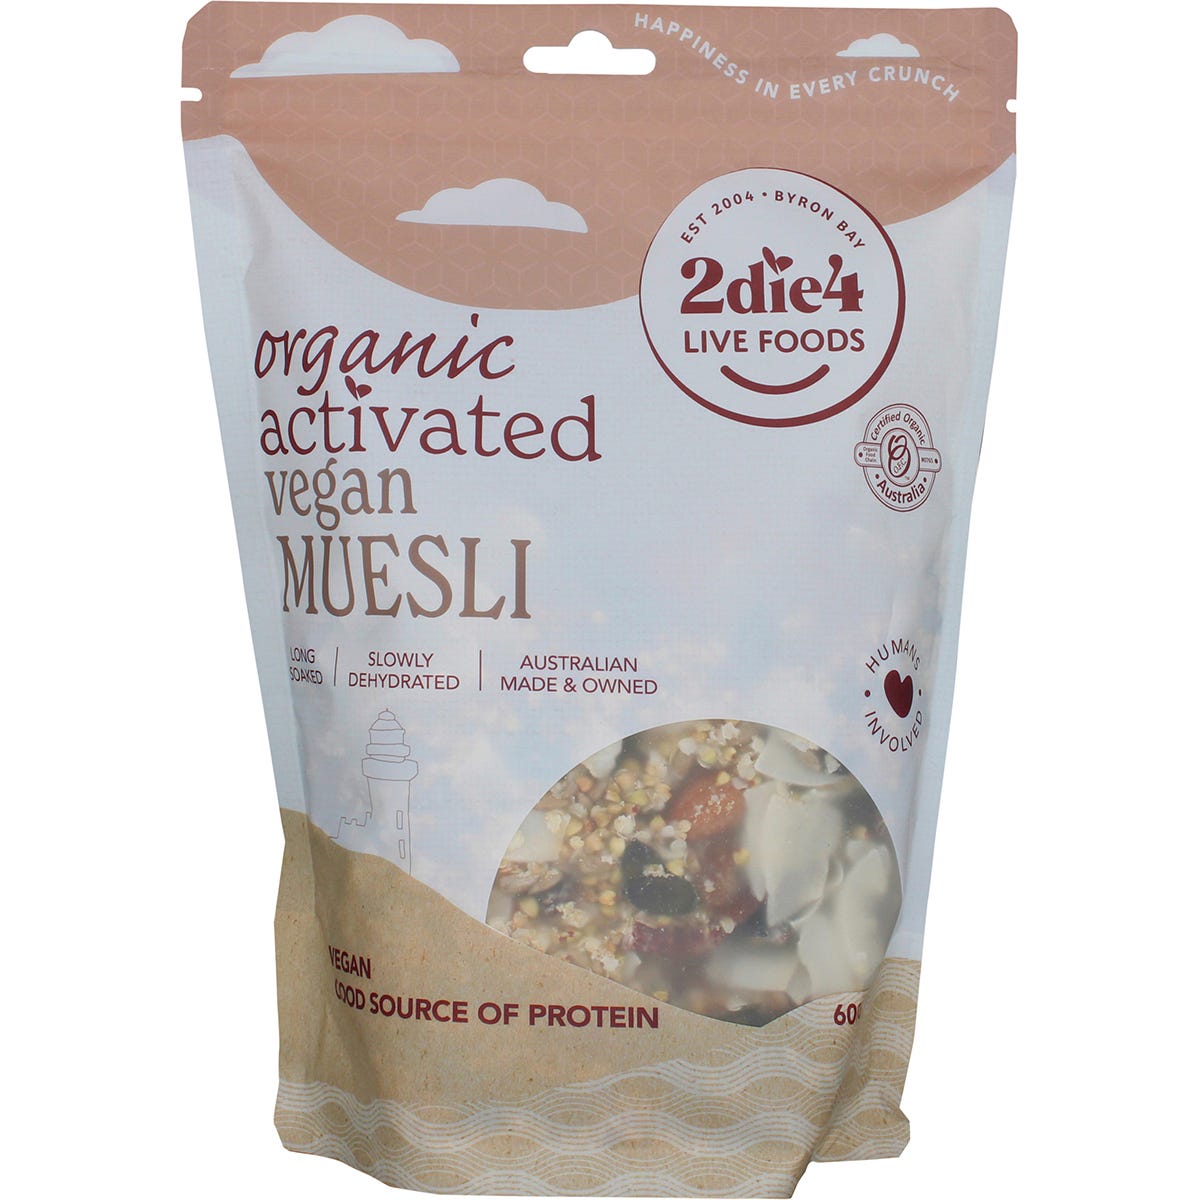 2die4 Live Foods Organic Activated Muesli 600g - Dr Earth - Breakfast